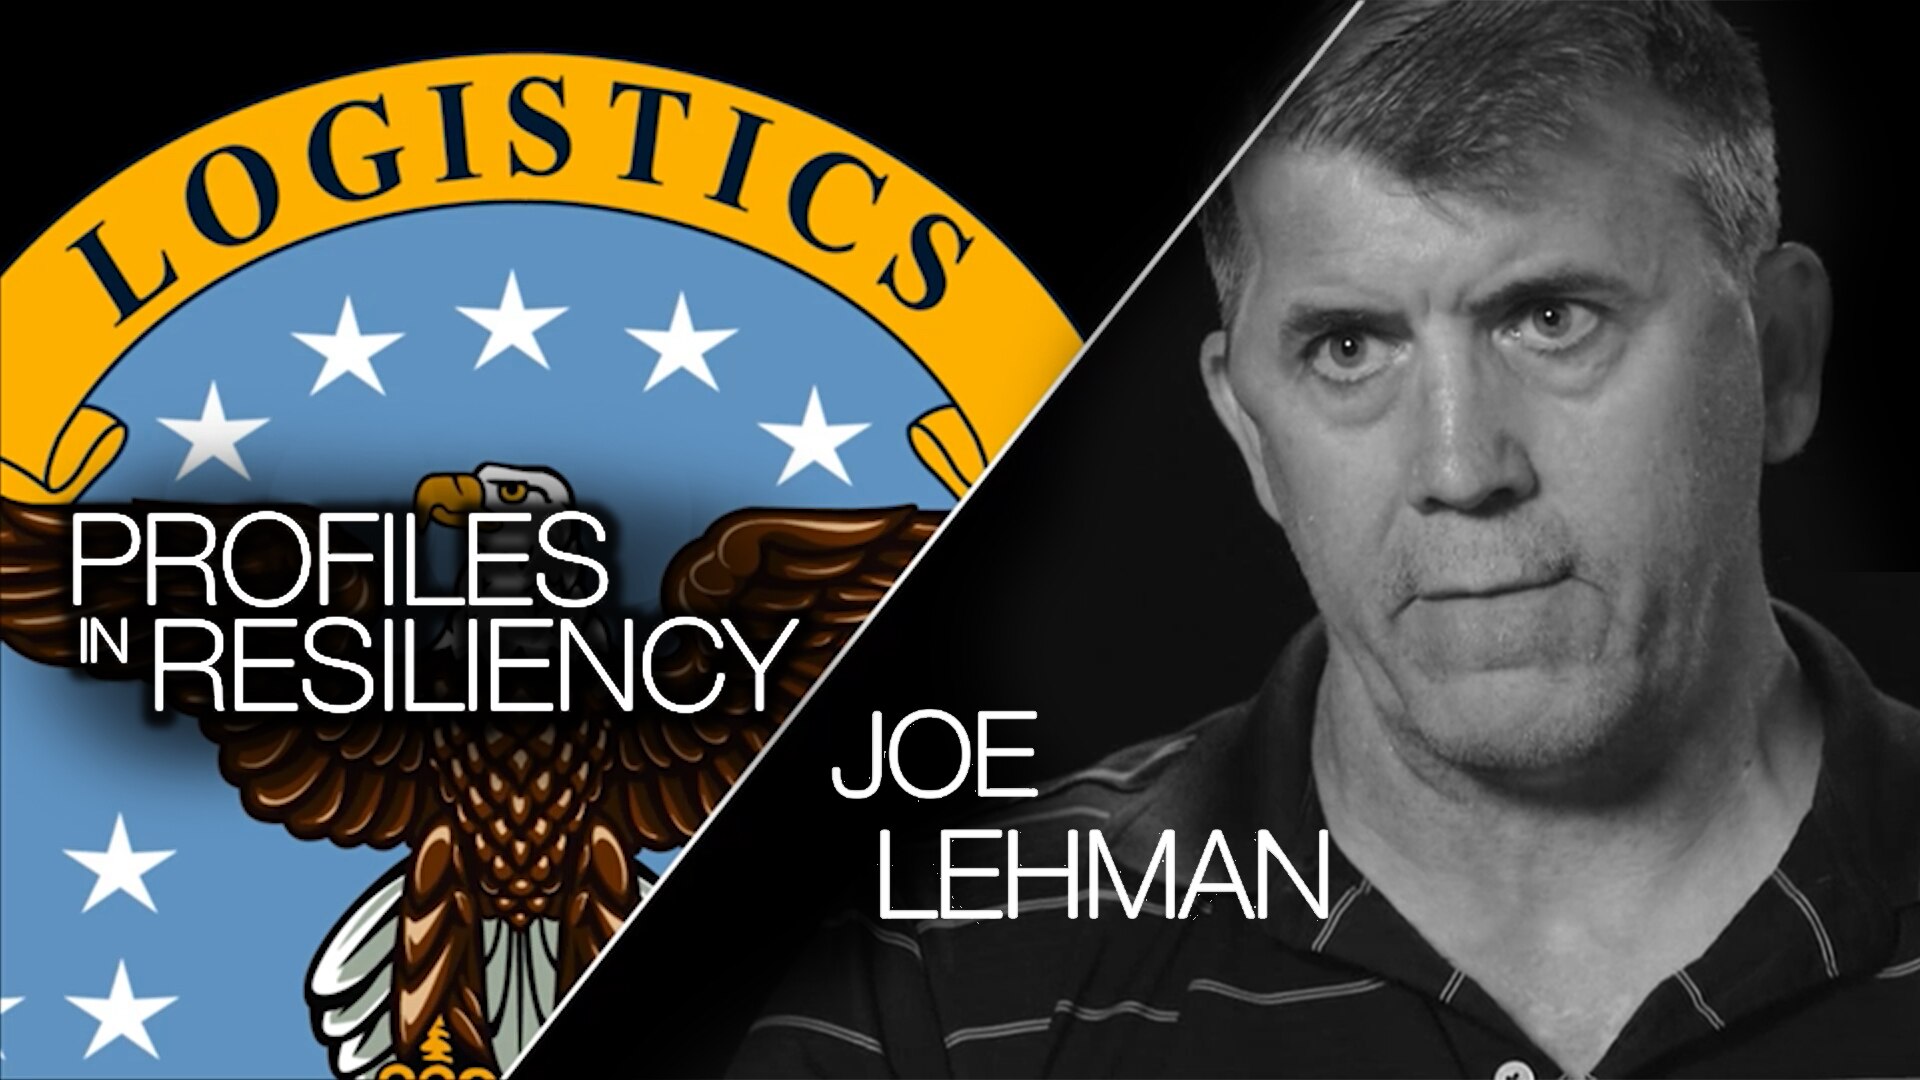 In a brief video, DLA's Joe Lehman recounts how he overcame serious injury with the help of family, friends and coworkers.